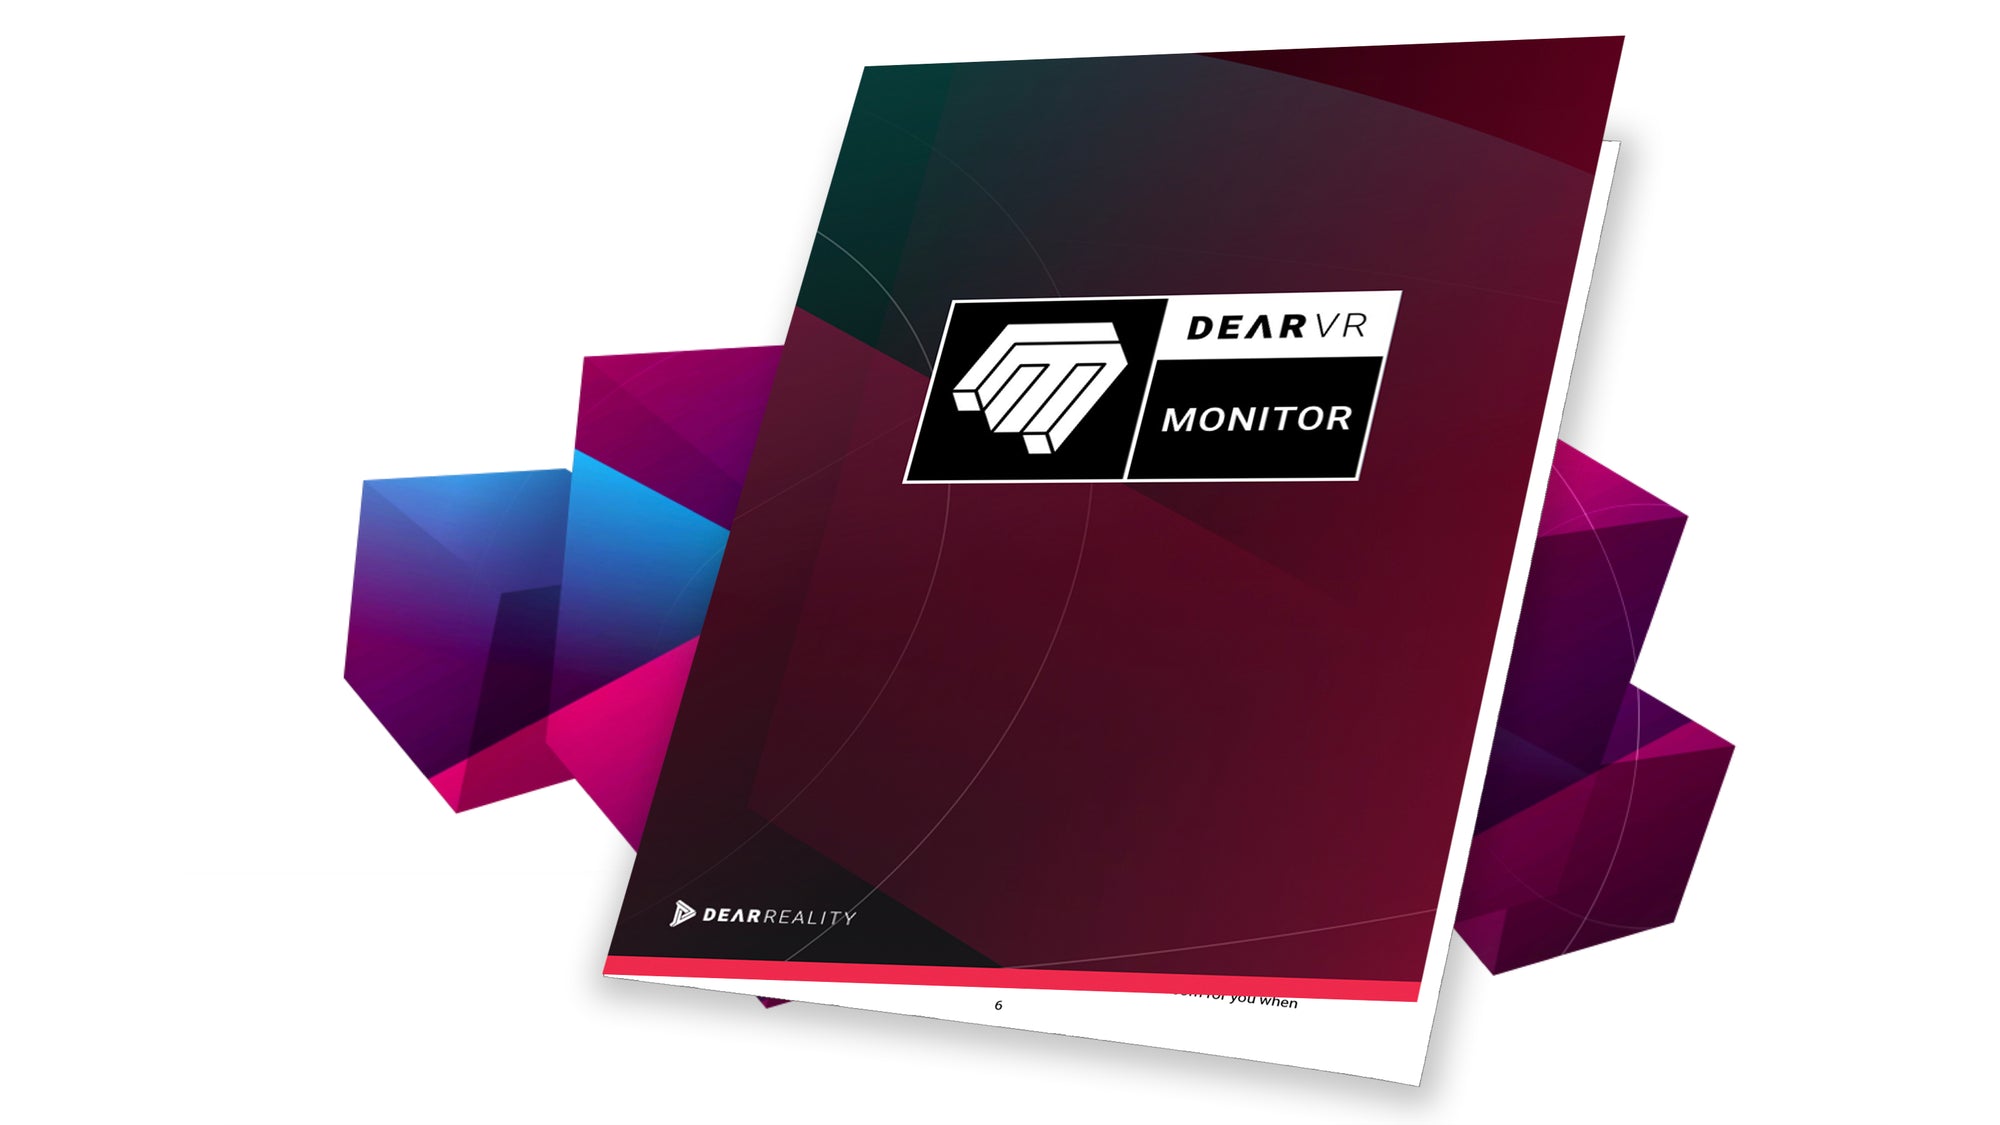 Download the dearVR MONITOR manual to get detailed insights